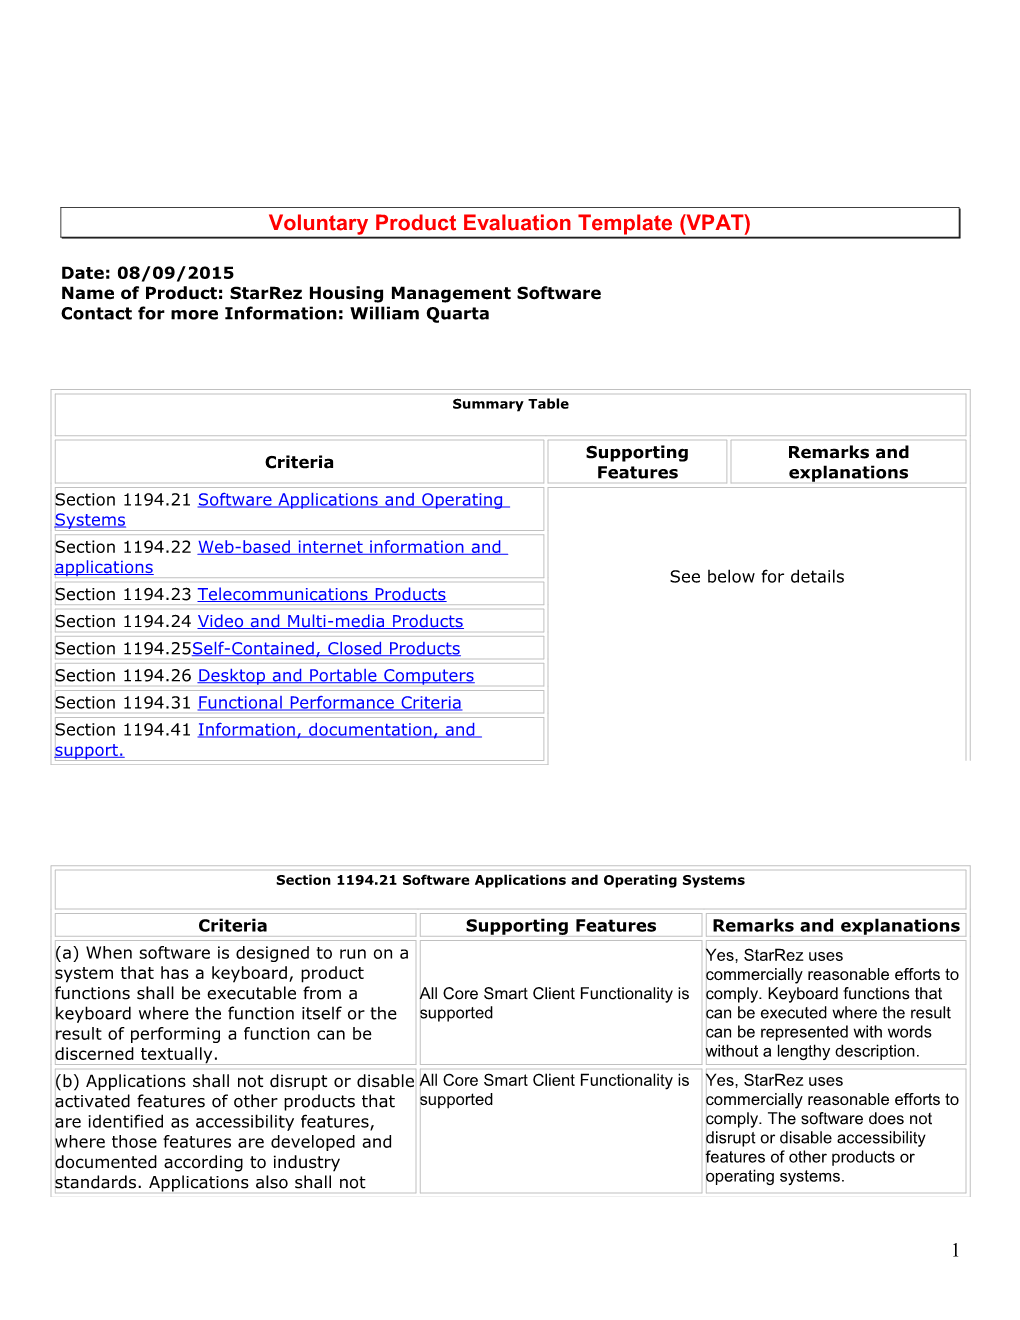 Section 508 Evaluation Template s1